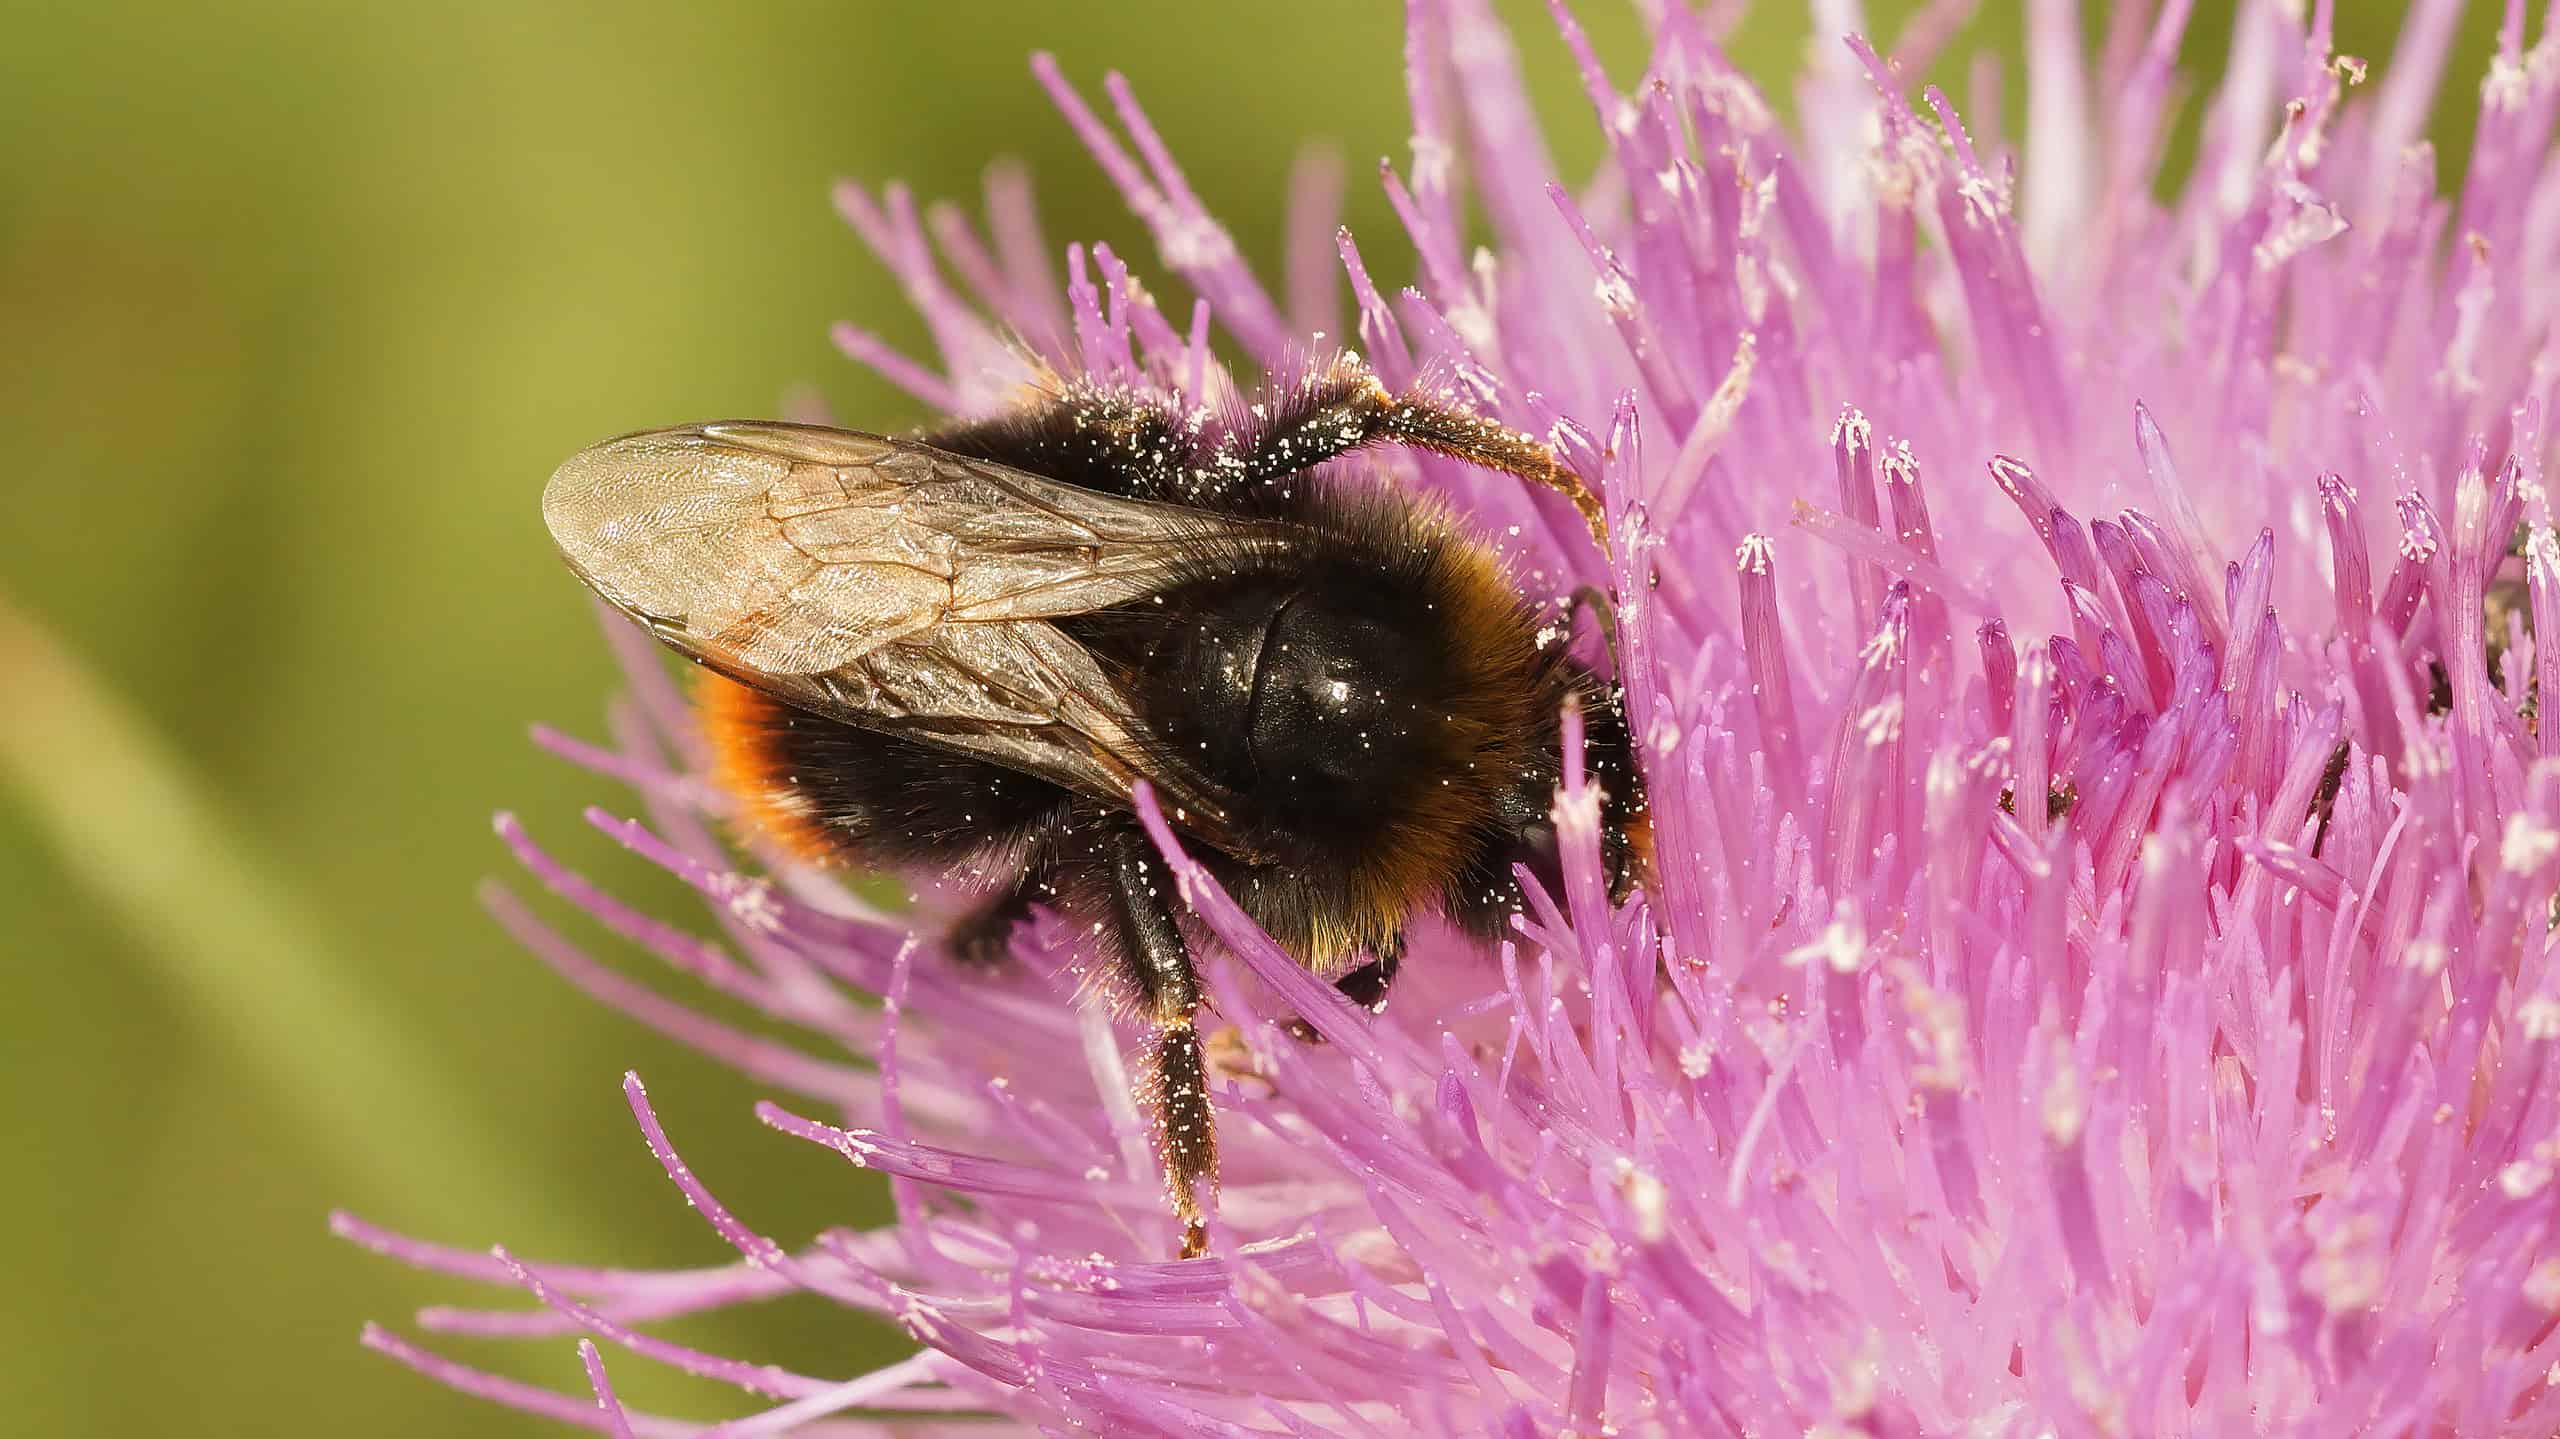 A closeup of a Bombus campestris cuckoo bumblebee with its nose shoved into the center of a big pink flower that takes up most of the right and bottom frame. The bee is almost horizontal, with its face pointing to the right. It is mostly black with a yellow tail.